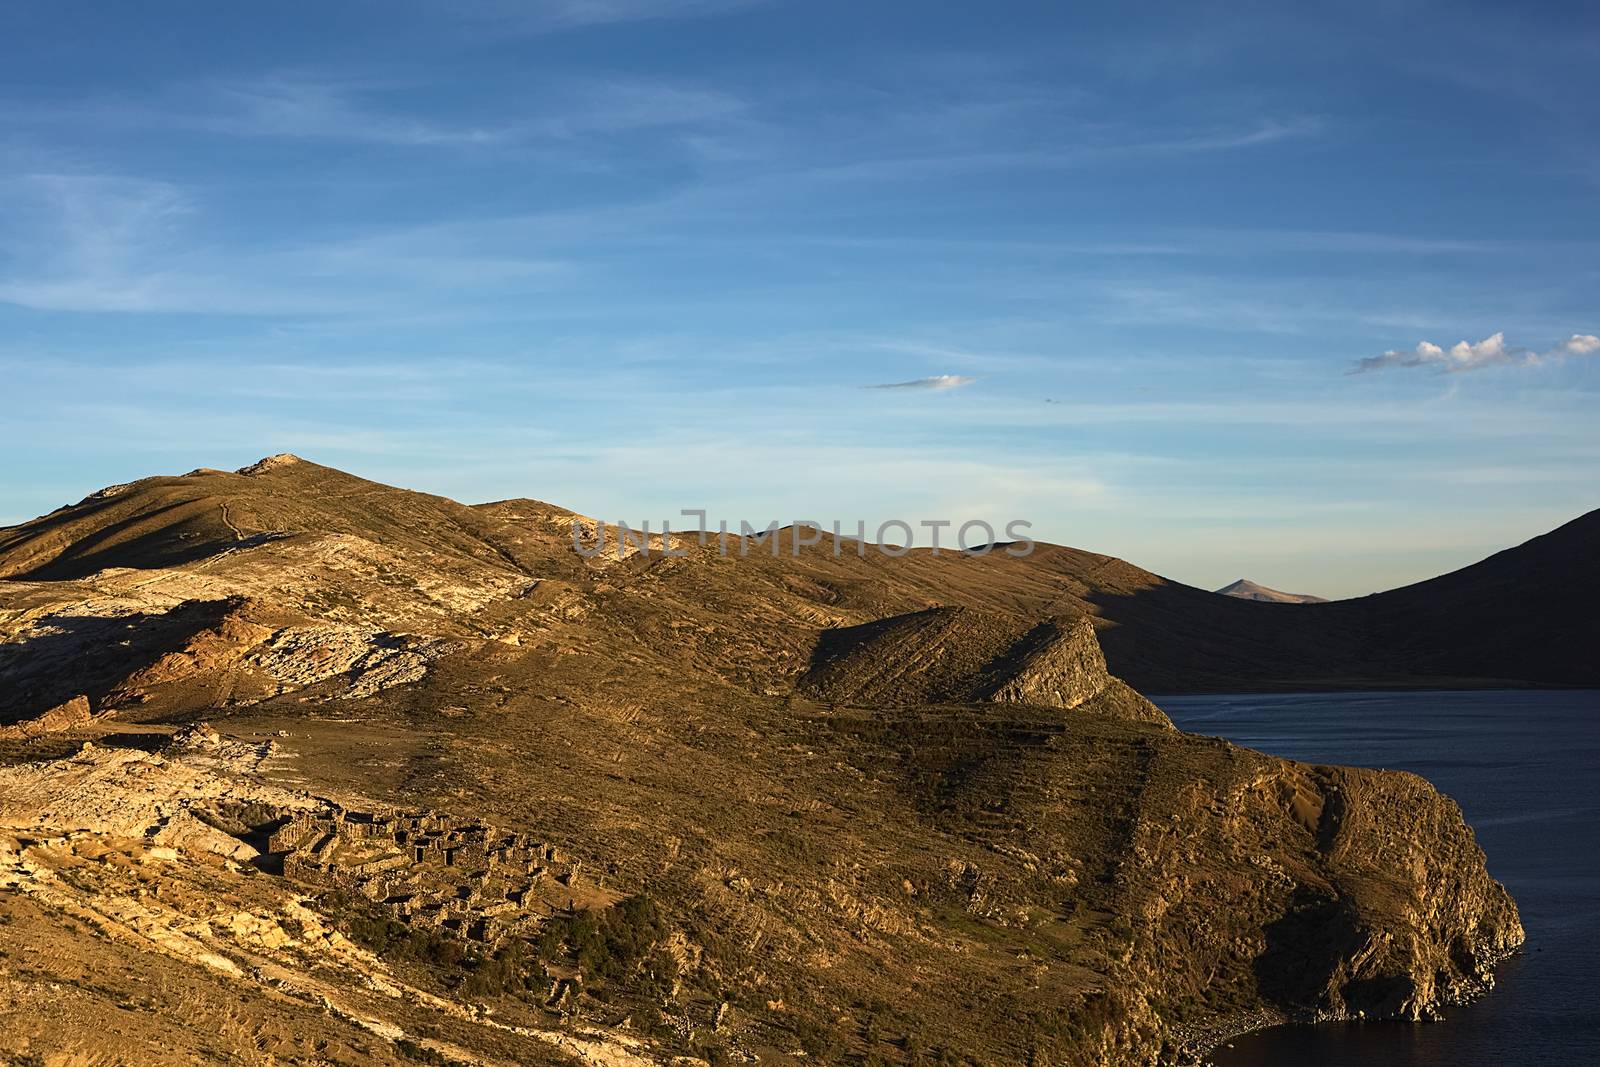 The Northern part of Isla del Sol (Island of the Sun), a popular tourist destination on Lake Titicaca, Bolivia before sunset. In the left lower corner the Tiwanaku-Inca ruin Chinkana is visible.